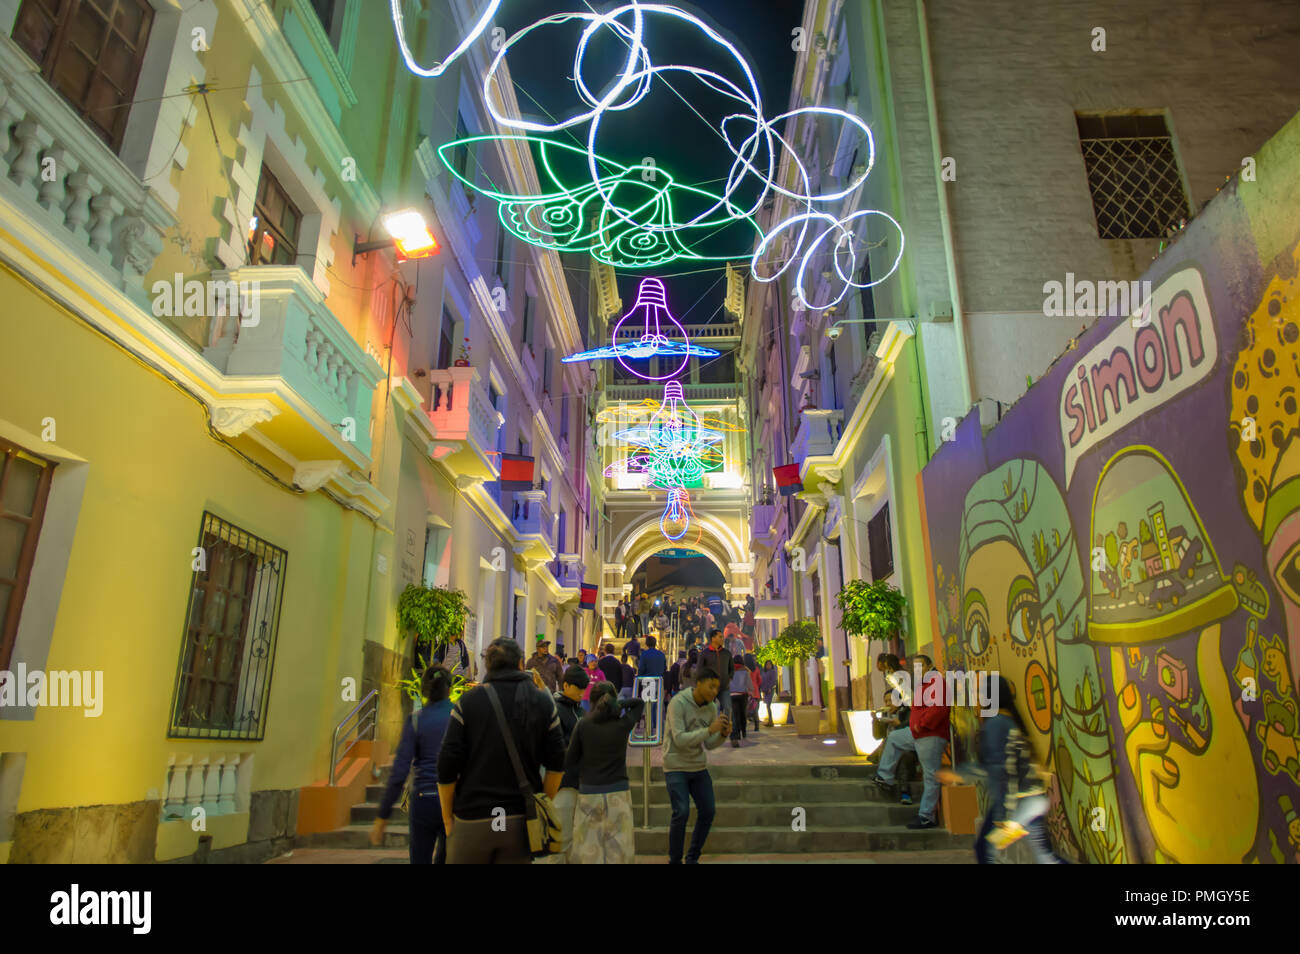 QUITO, ECUADOR- AUGUST, 15, 2018: Unidentified people walking in a tight street during a spectacle of lights projected on the walls with some illuminated figures during the Quito light festival Stock Photo